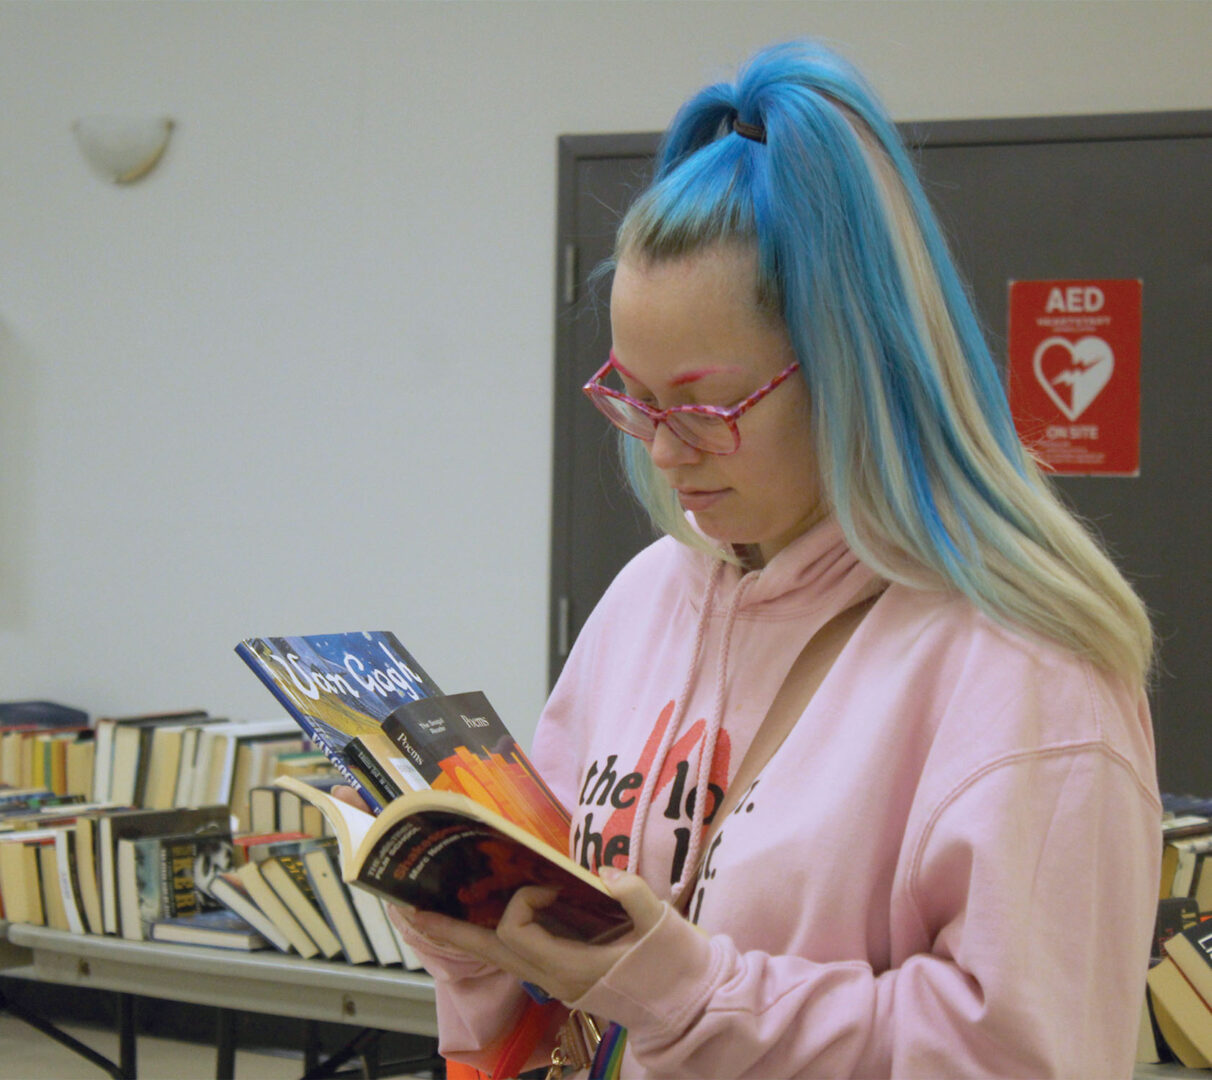 A young blonde woman with streaks of dyed-blue hair standing in front of a table of books, while flips through a book in her hand, while holding other books between her arm.